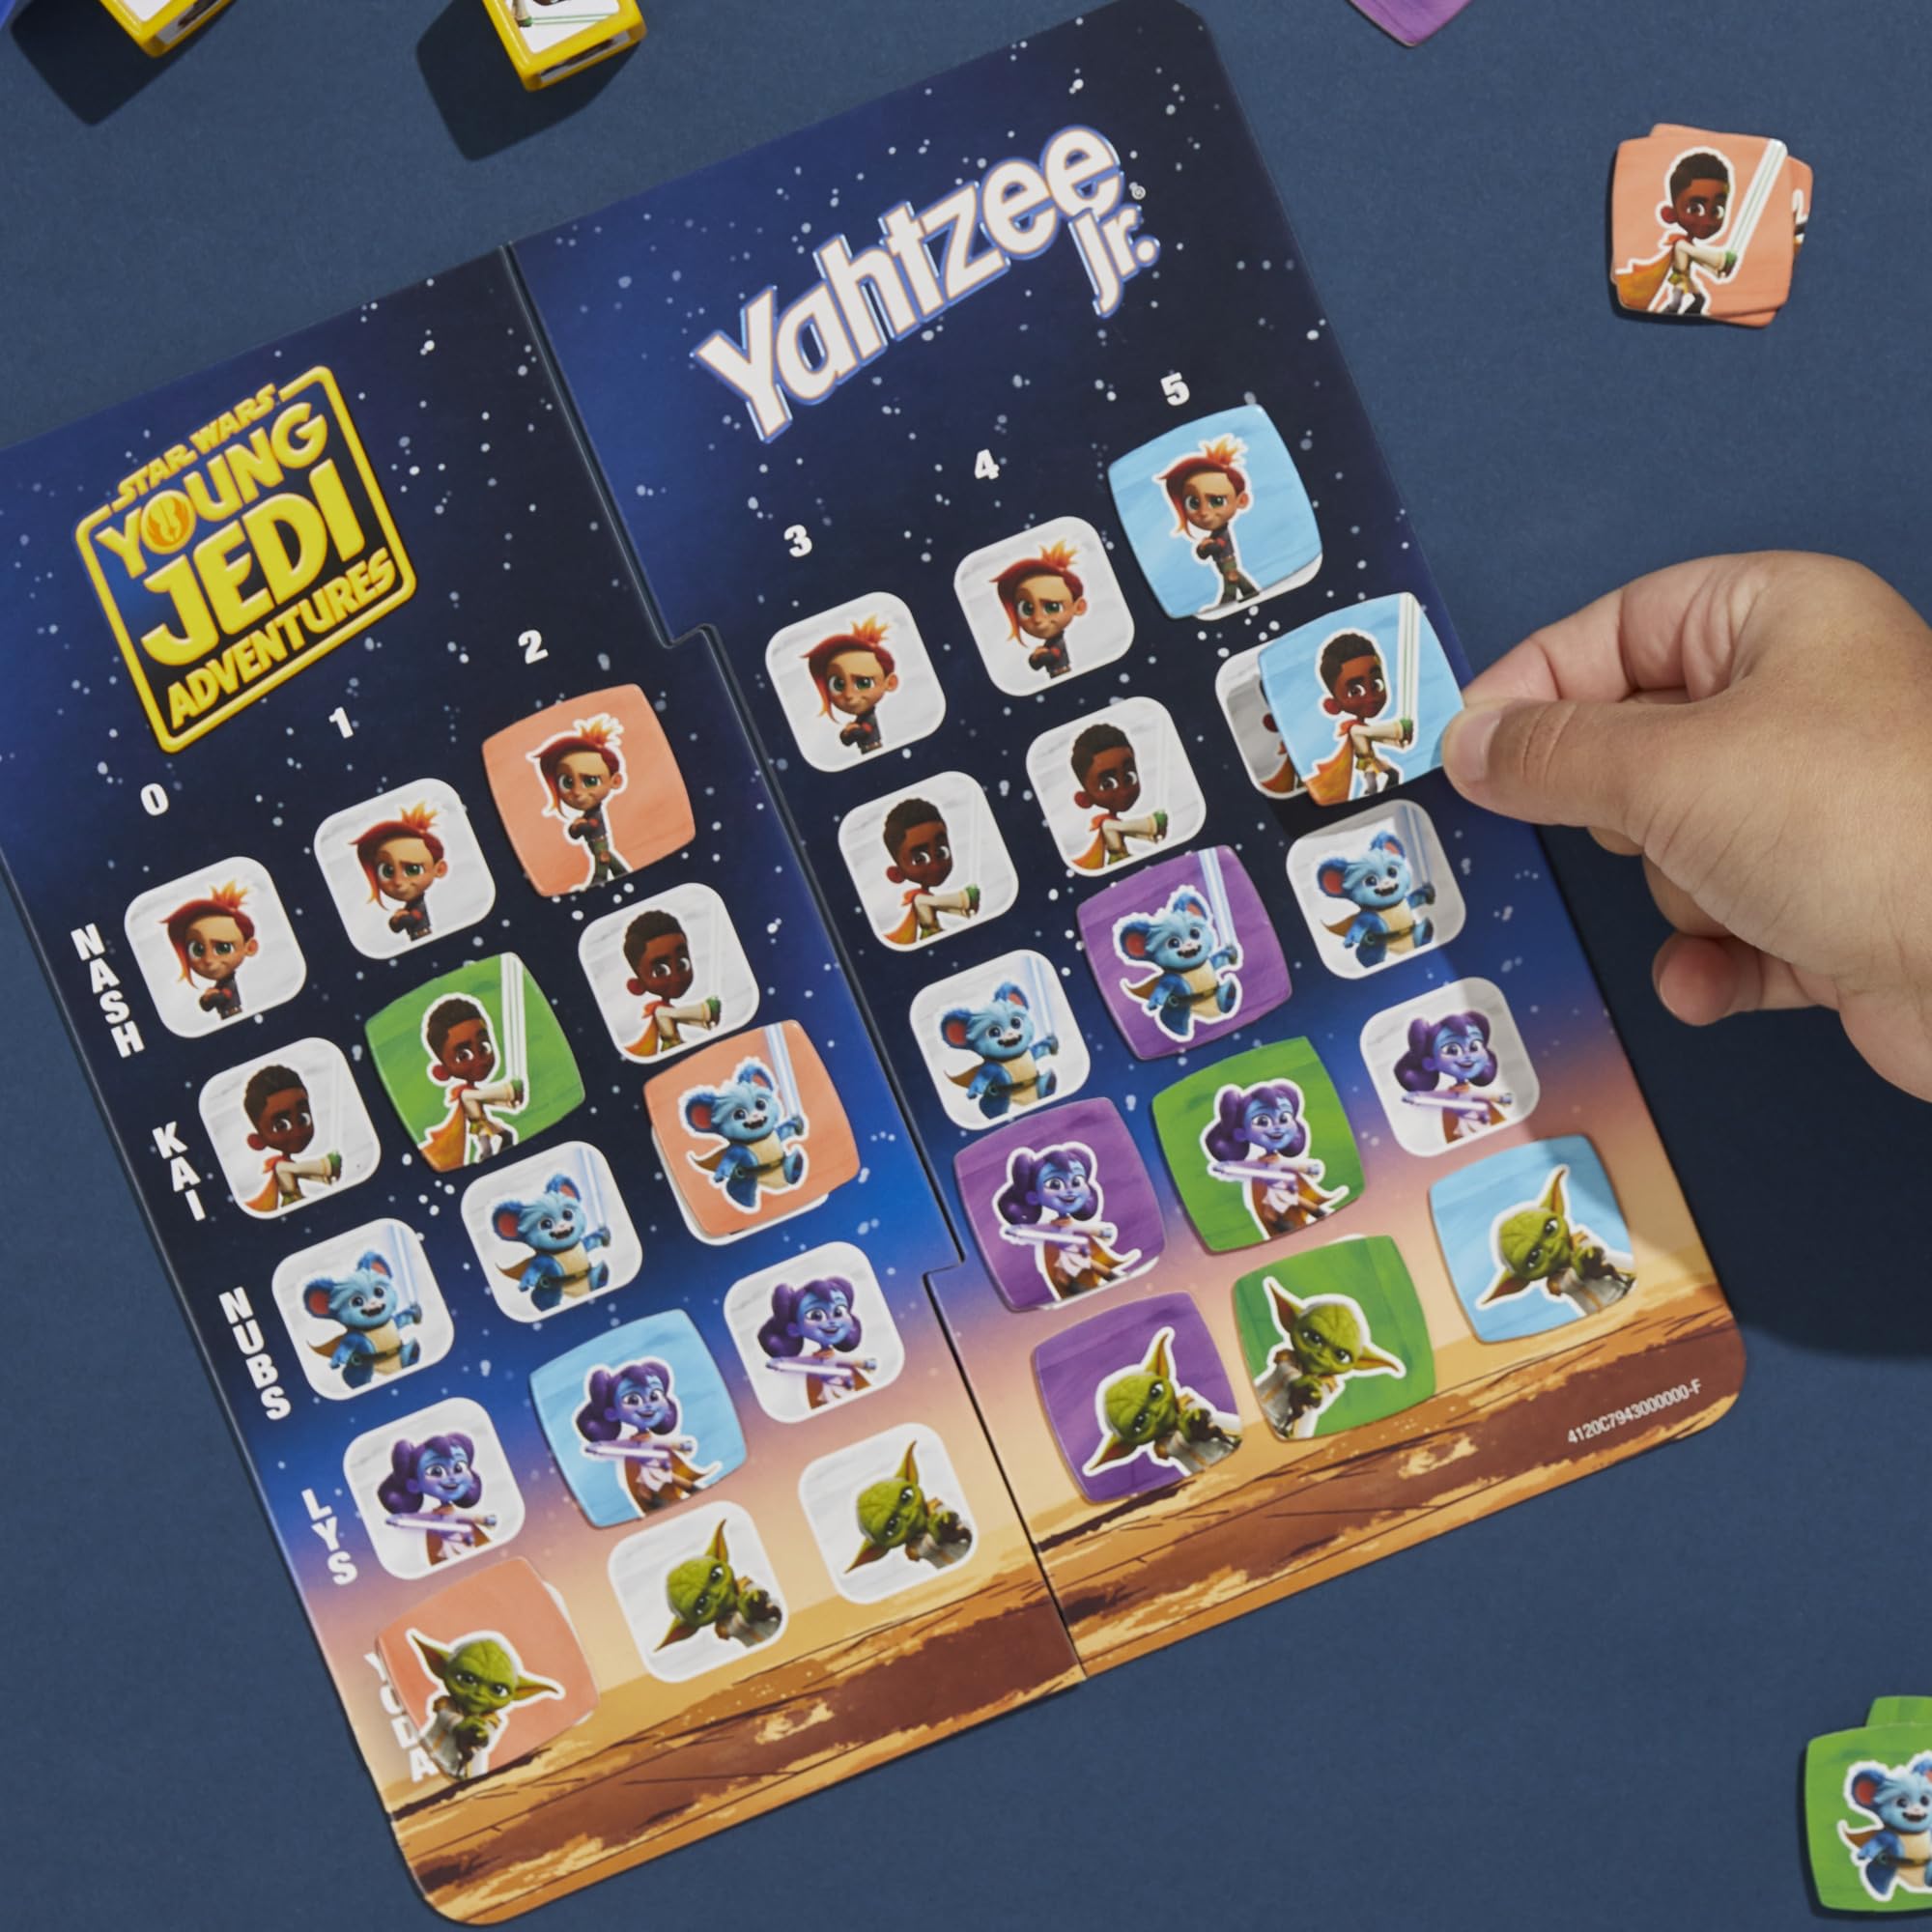 Yahtzee Jr.: Star Wars Young Jedi Adventures Edition Board Game for Kids | Ages 4+ | 2-4 Players | Counting and Matching Games for Preschoolers (Amazon Exclusive)